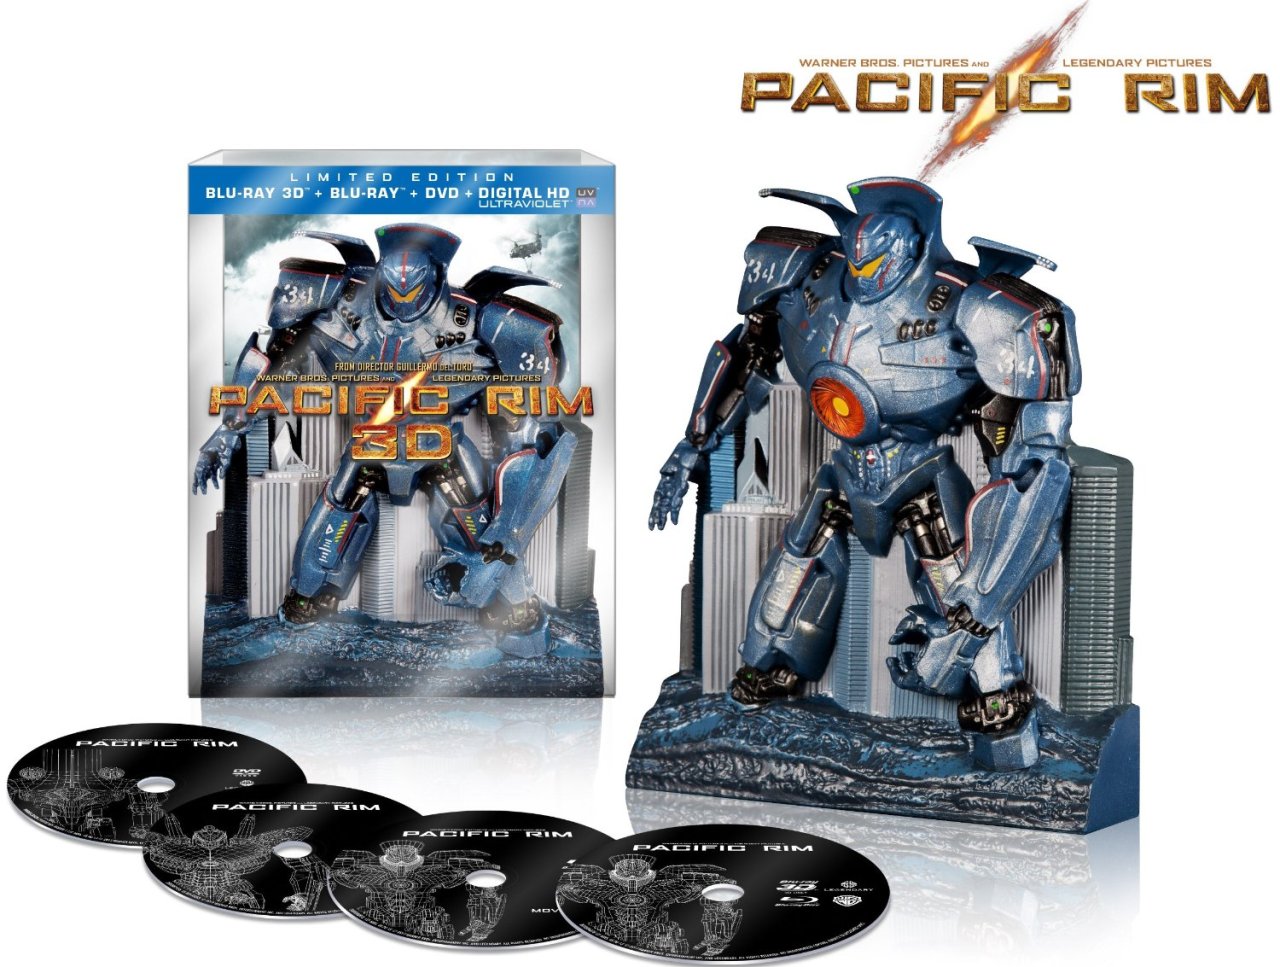 PACIFIC RIM BLU-RAY COLLECTOR’S EDITION
CANCEL THE APOCALYPSE! Pacific Rim’s awesome limited edition blu-ray is on sale today only at 55% off! The set comes with a 3D, Blu-Ray, DVD and digital copy of the film, along with your very own collectible...